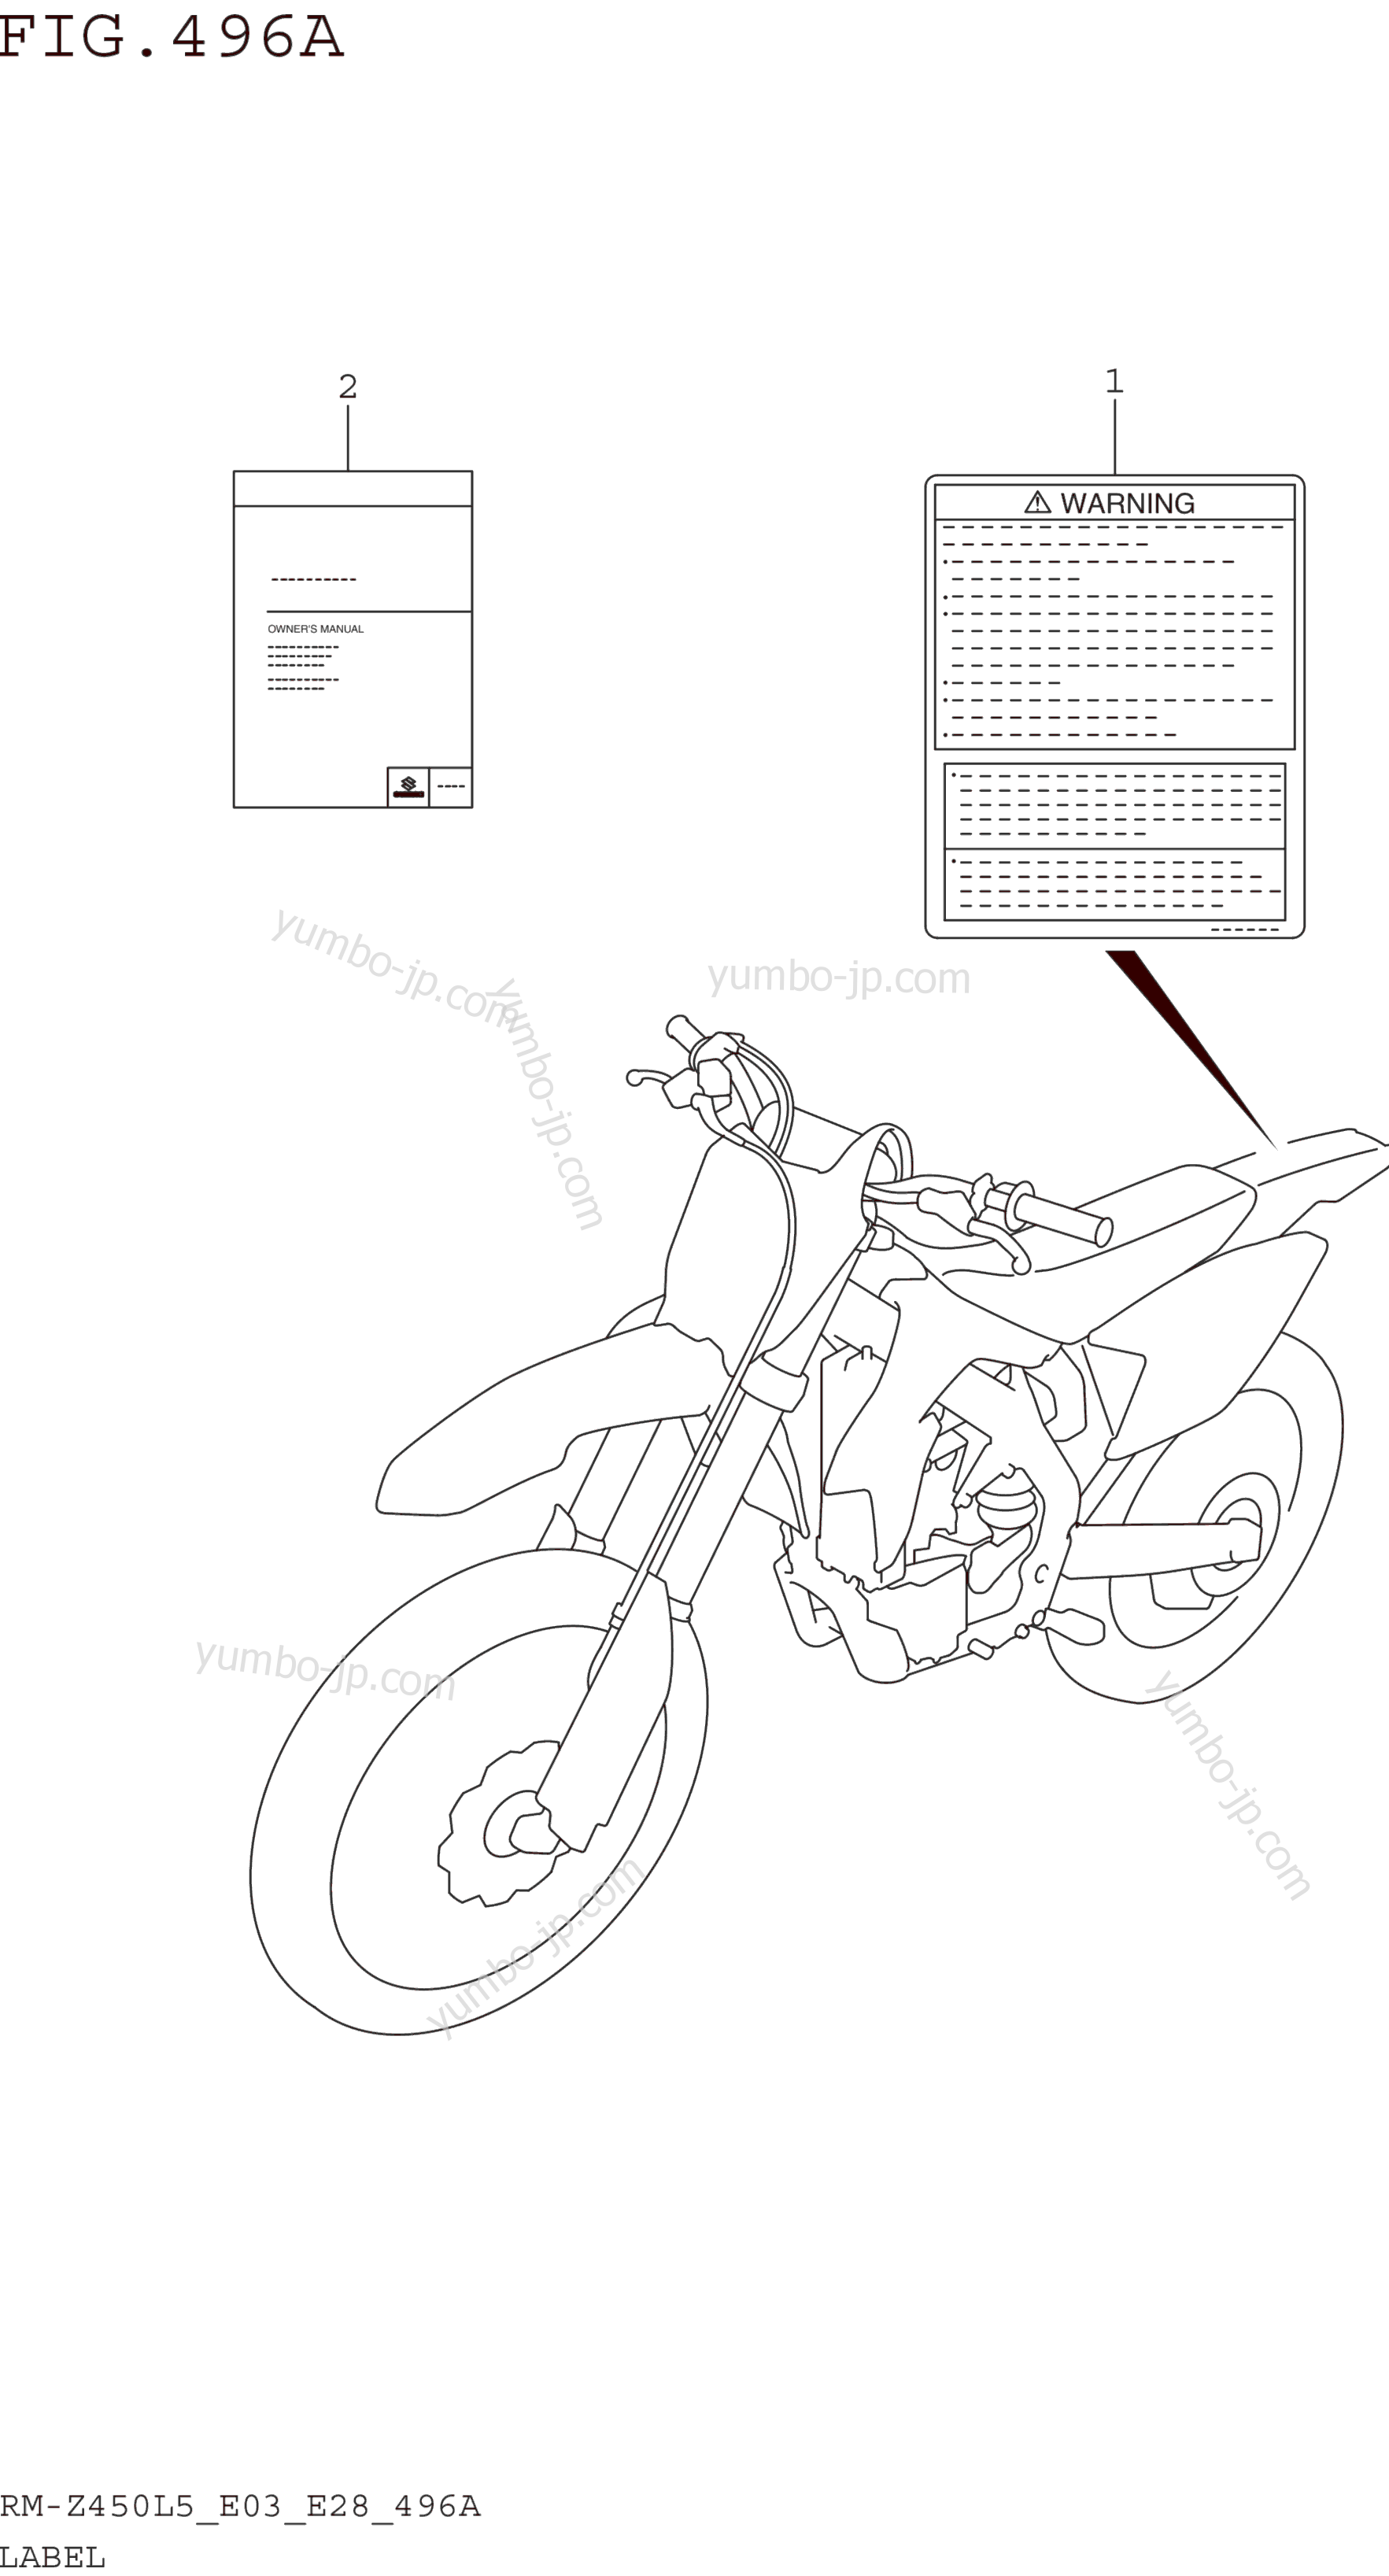 LABEL (RM-Z450L5 E03) for motorcycles SUZUKI RM-Z450 2015 year